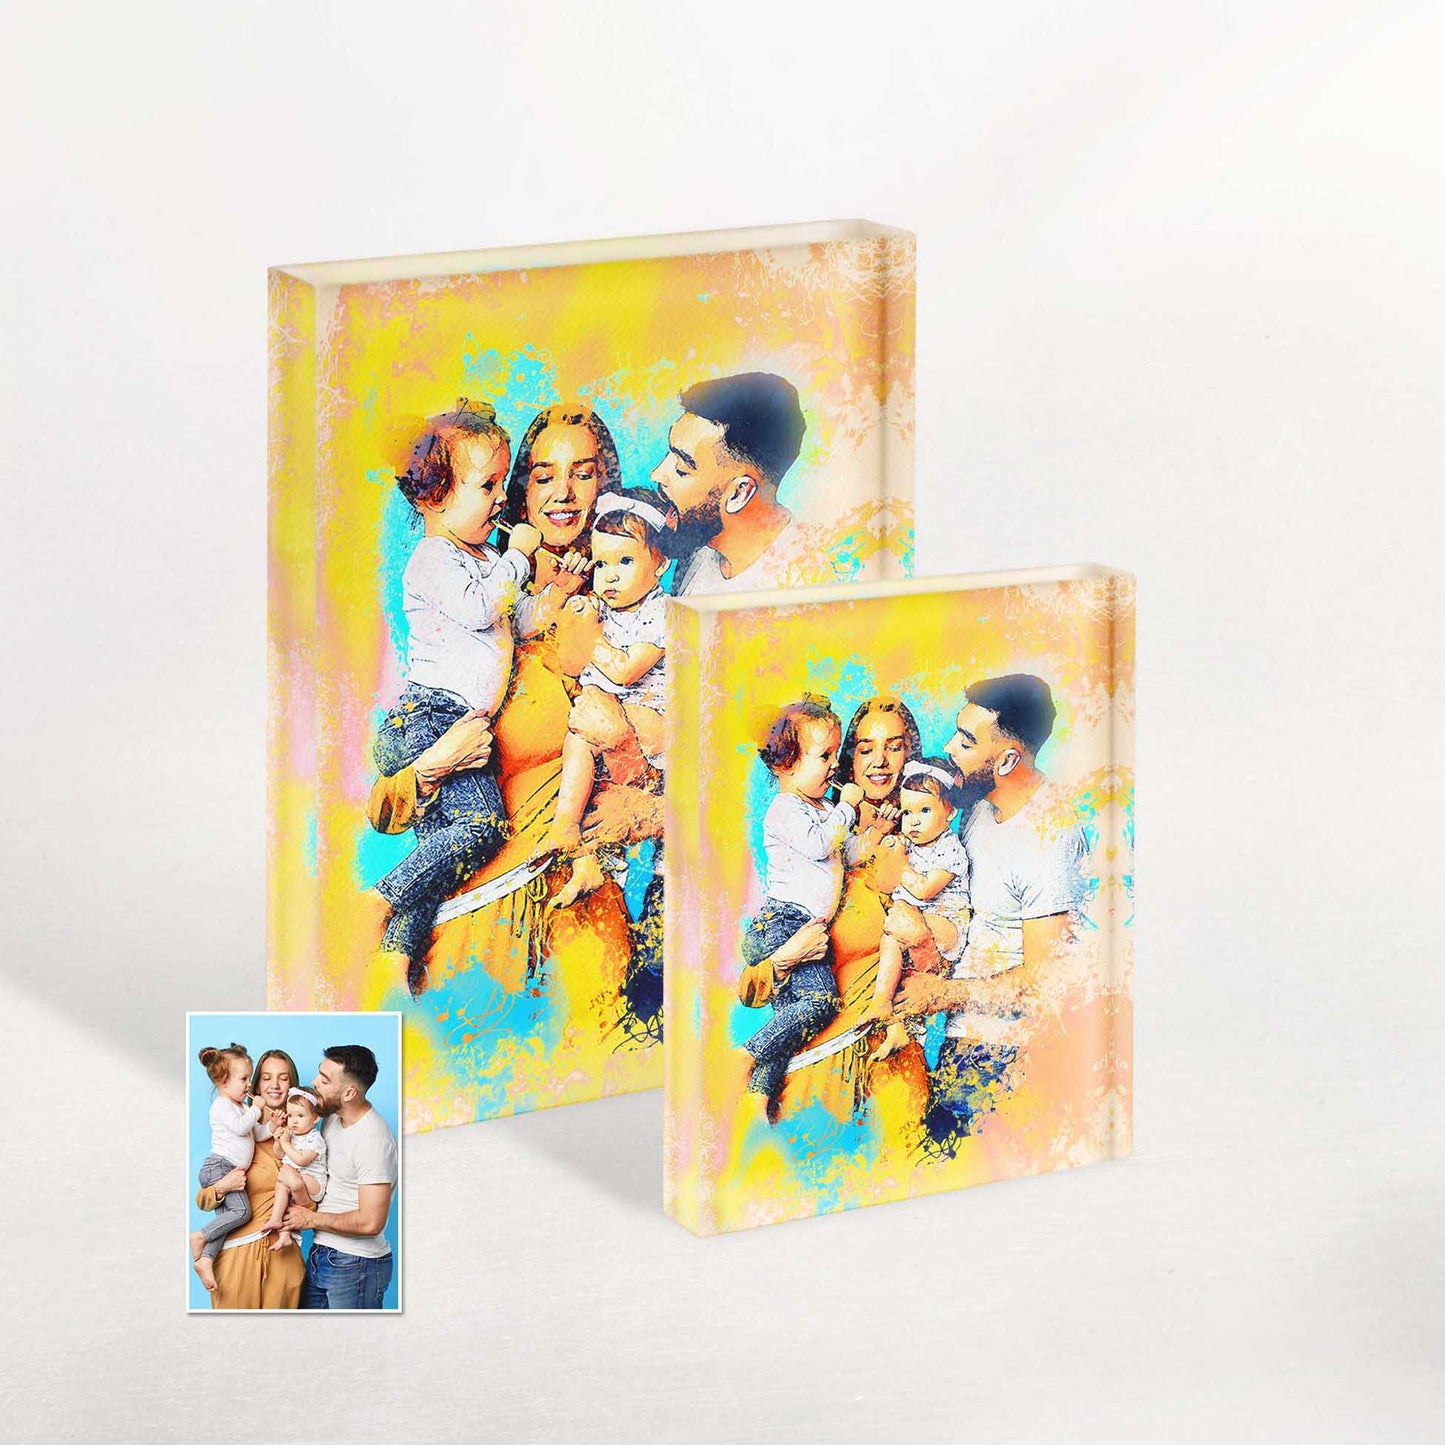 Personalize your home with our Personalised Splash Watercolor Acrylic Block Photo. The cool and creative splash effect adds a unique and artistic touch to your decor